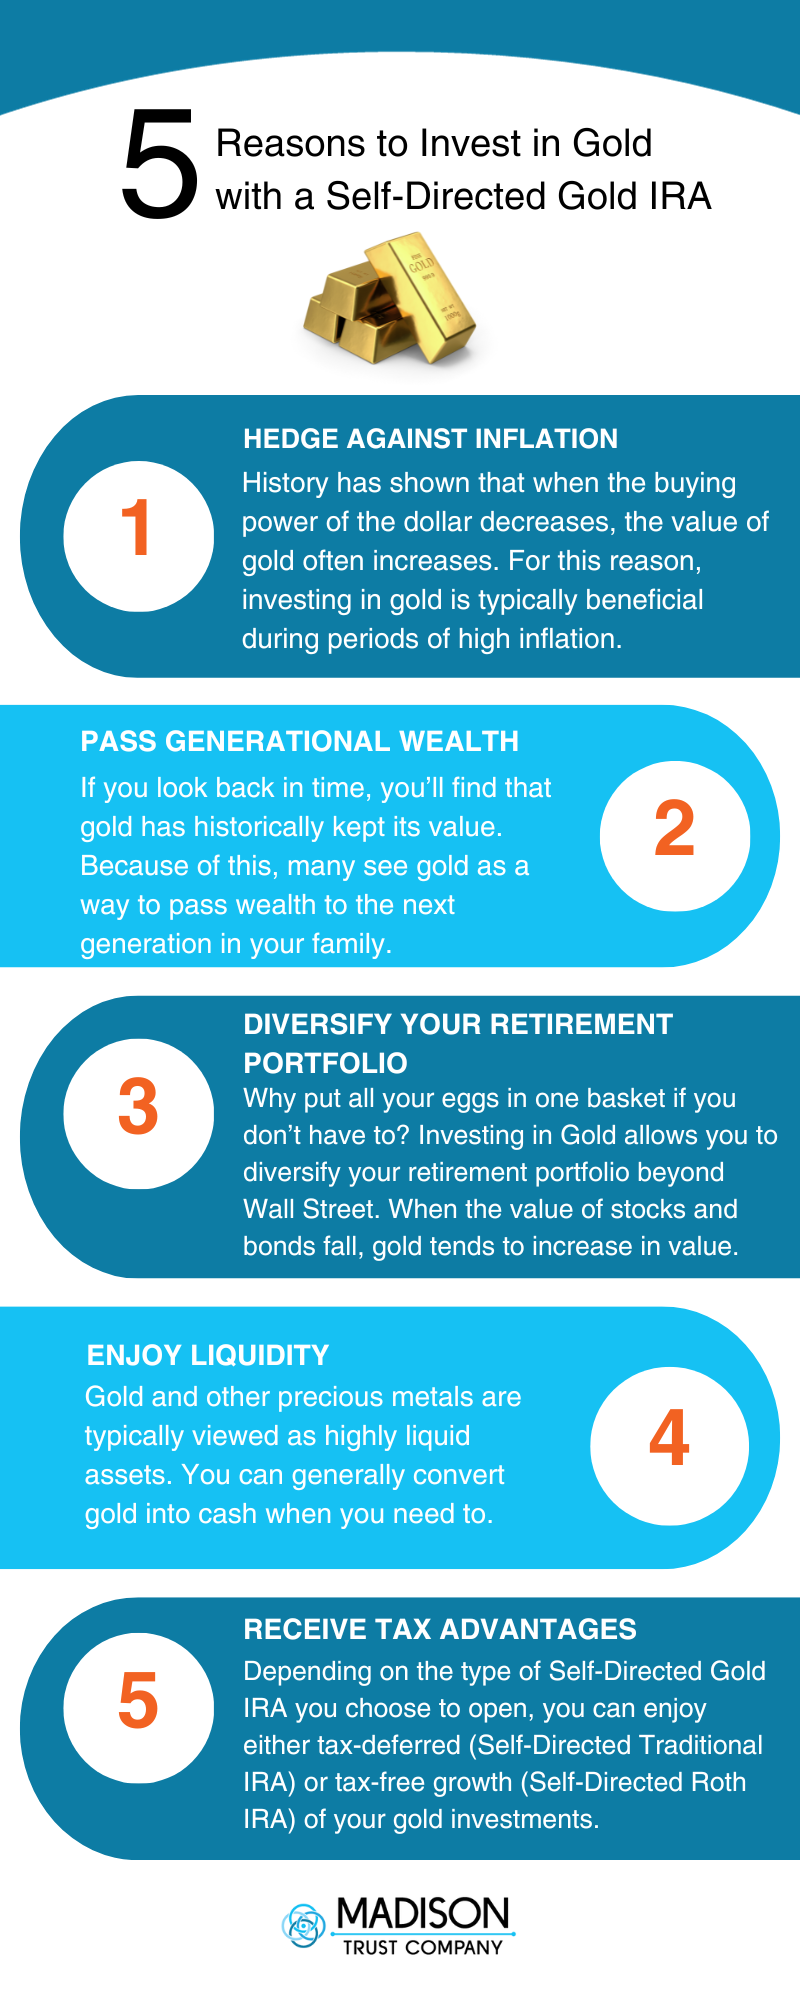 5 Reasons to Invest in Gold with a Self-Directed Gold IRA Infographic: (1) Hedge Against Inflation - History has shown that when the buying power of the dollar decreases, the value of gold often increases. For this reason, investing in gold is typically beneficial during periods of high inflation. (2) Pass Generational Wealth - If you look back in time, you’ll find that gold has historically kept its value. Because of this, many see gold as a way to pass wealth to the next generation in your family. (3) Diversify Your Retirement Portfolio - Why put all your eggs in one basket if you don’t have to? Investing in gold allows you to diversify your retirement portfolio beyond Wall Street. When the value of stocks and bonds fall, gold tends to increase in value. (4) Enjoy Liquidity - Gold and other precious metals are typically viewed as highly liquid assets. You can generally convert gold into cash when you need to. (5) Receive Tax Advantages - Depending on the type of Self-Directed Gold IRA you choose to open, you can enjoy either tax-deferred growth (Self-Directed Traditional IRA) or tax-free growth (Self-Directed Roth IRA) of your gold investments.